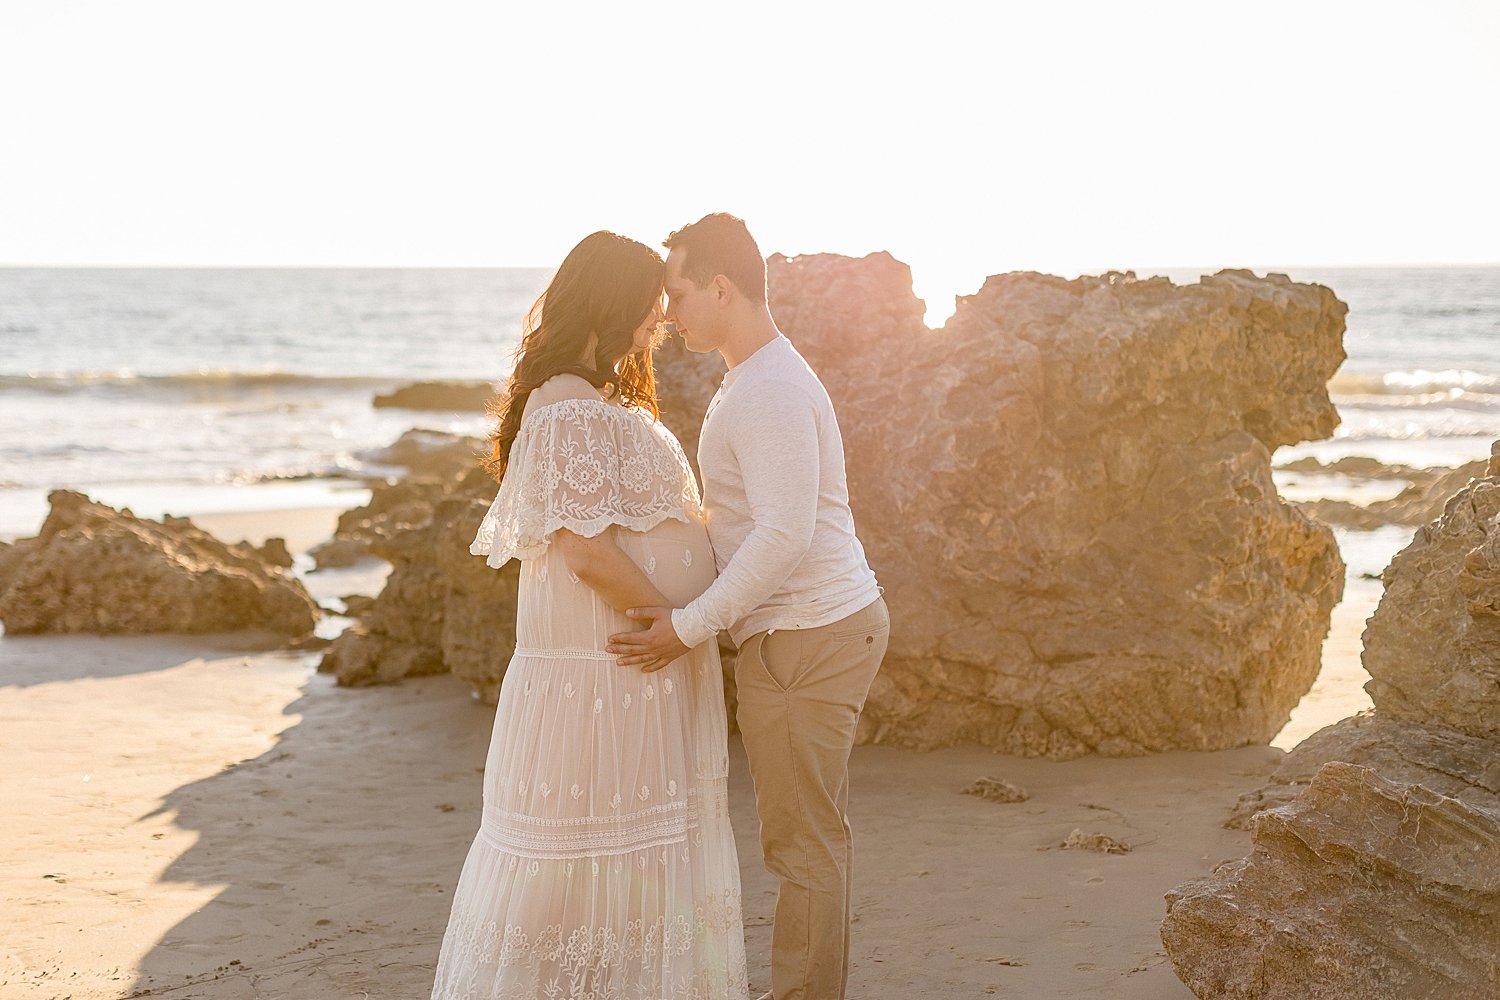 Golden hour at Crystal Cove beach during maternity session | Ambre Williams Photography